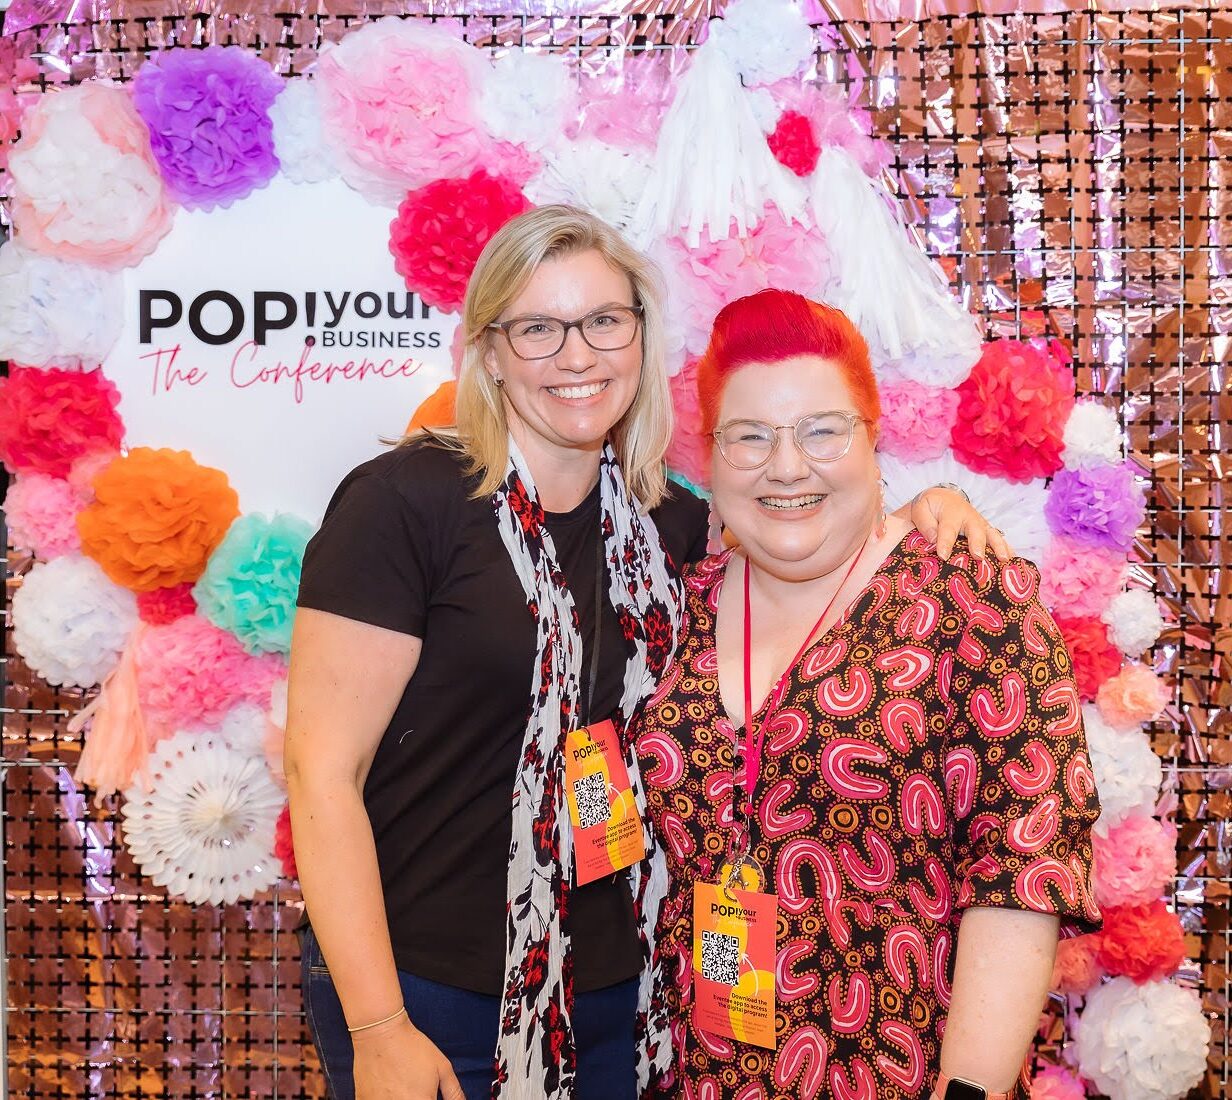 Lauren Winzar and Bec McFarland at Pop! your Business: The Conference 2022